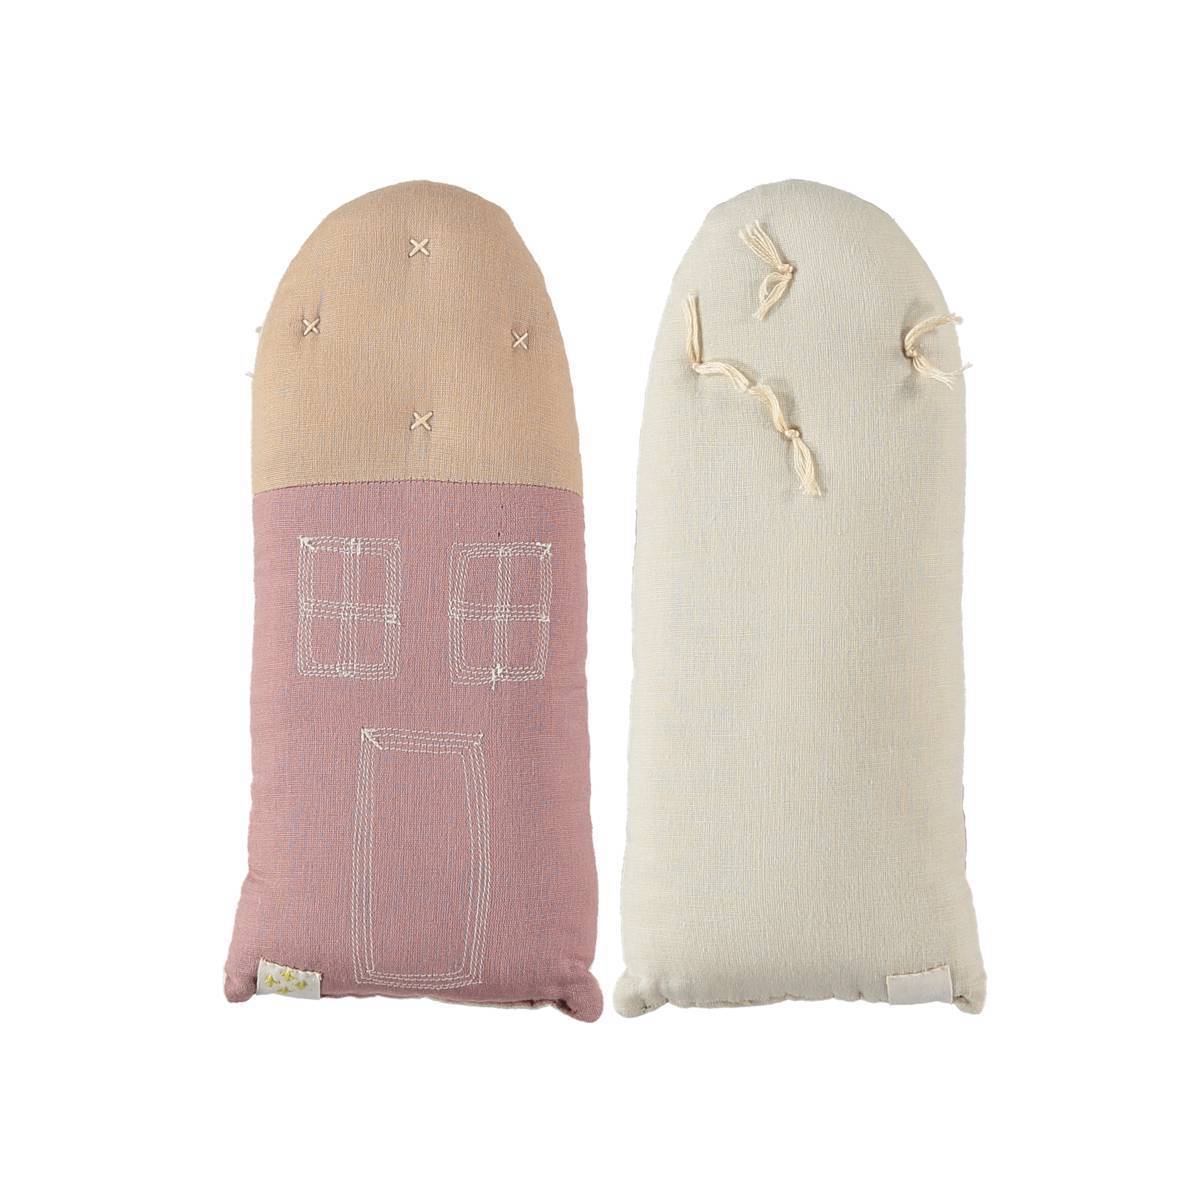 Camomile London | petite house kids cushion | blush and peach blossom - front back